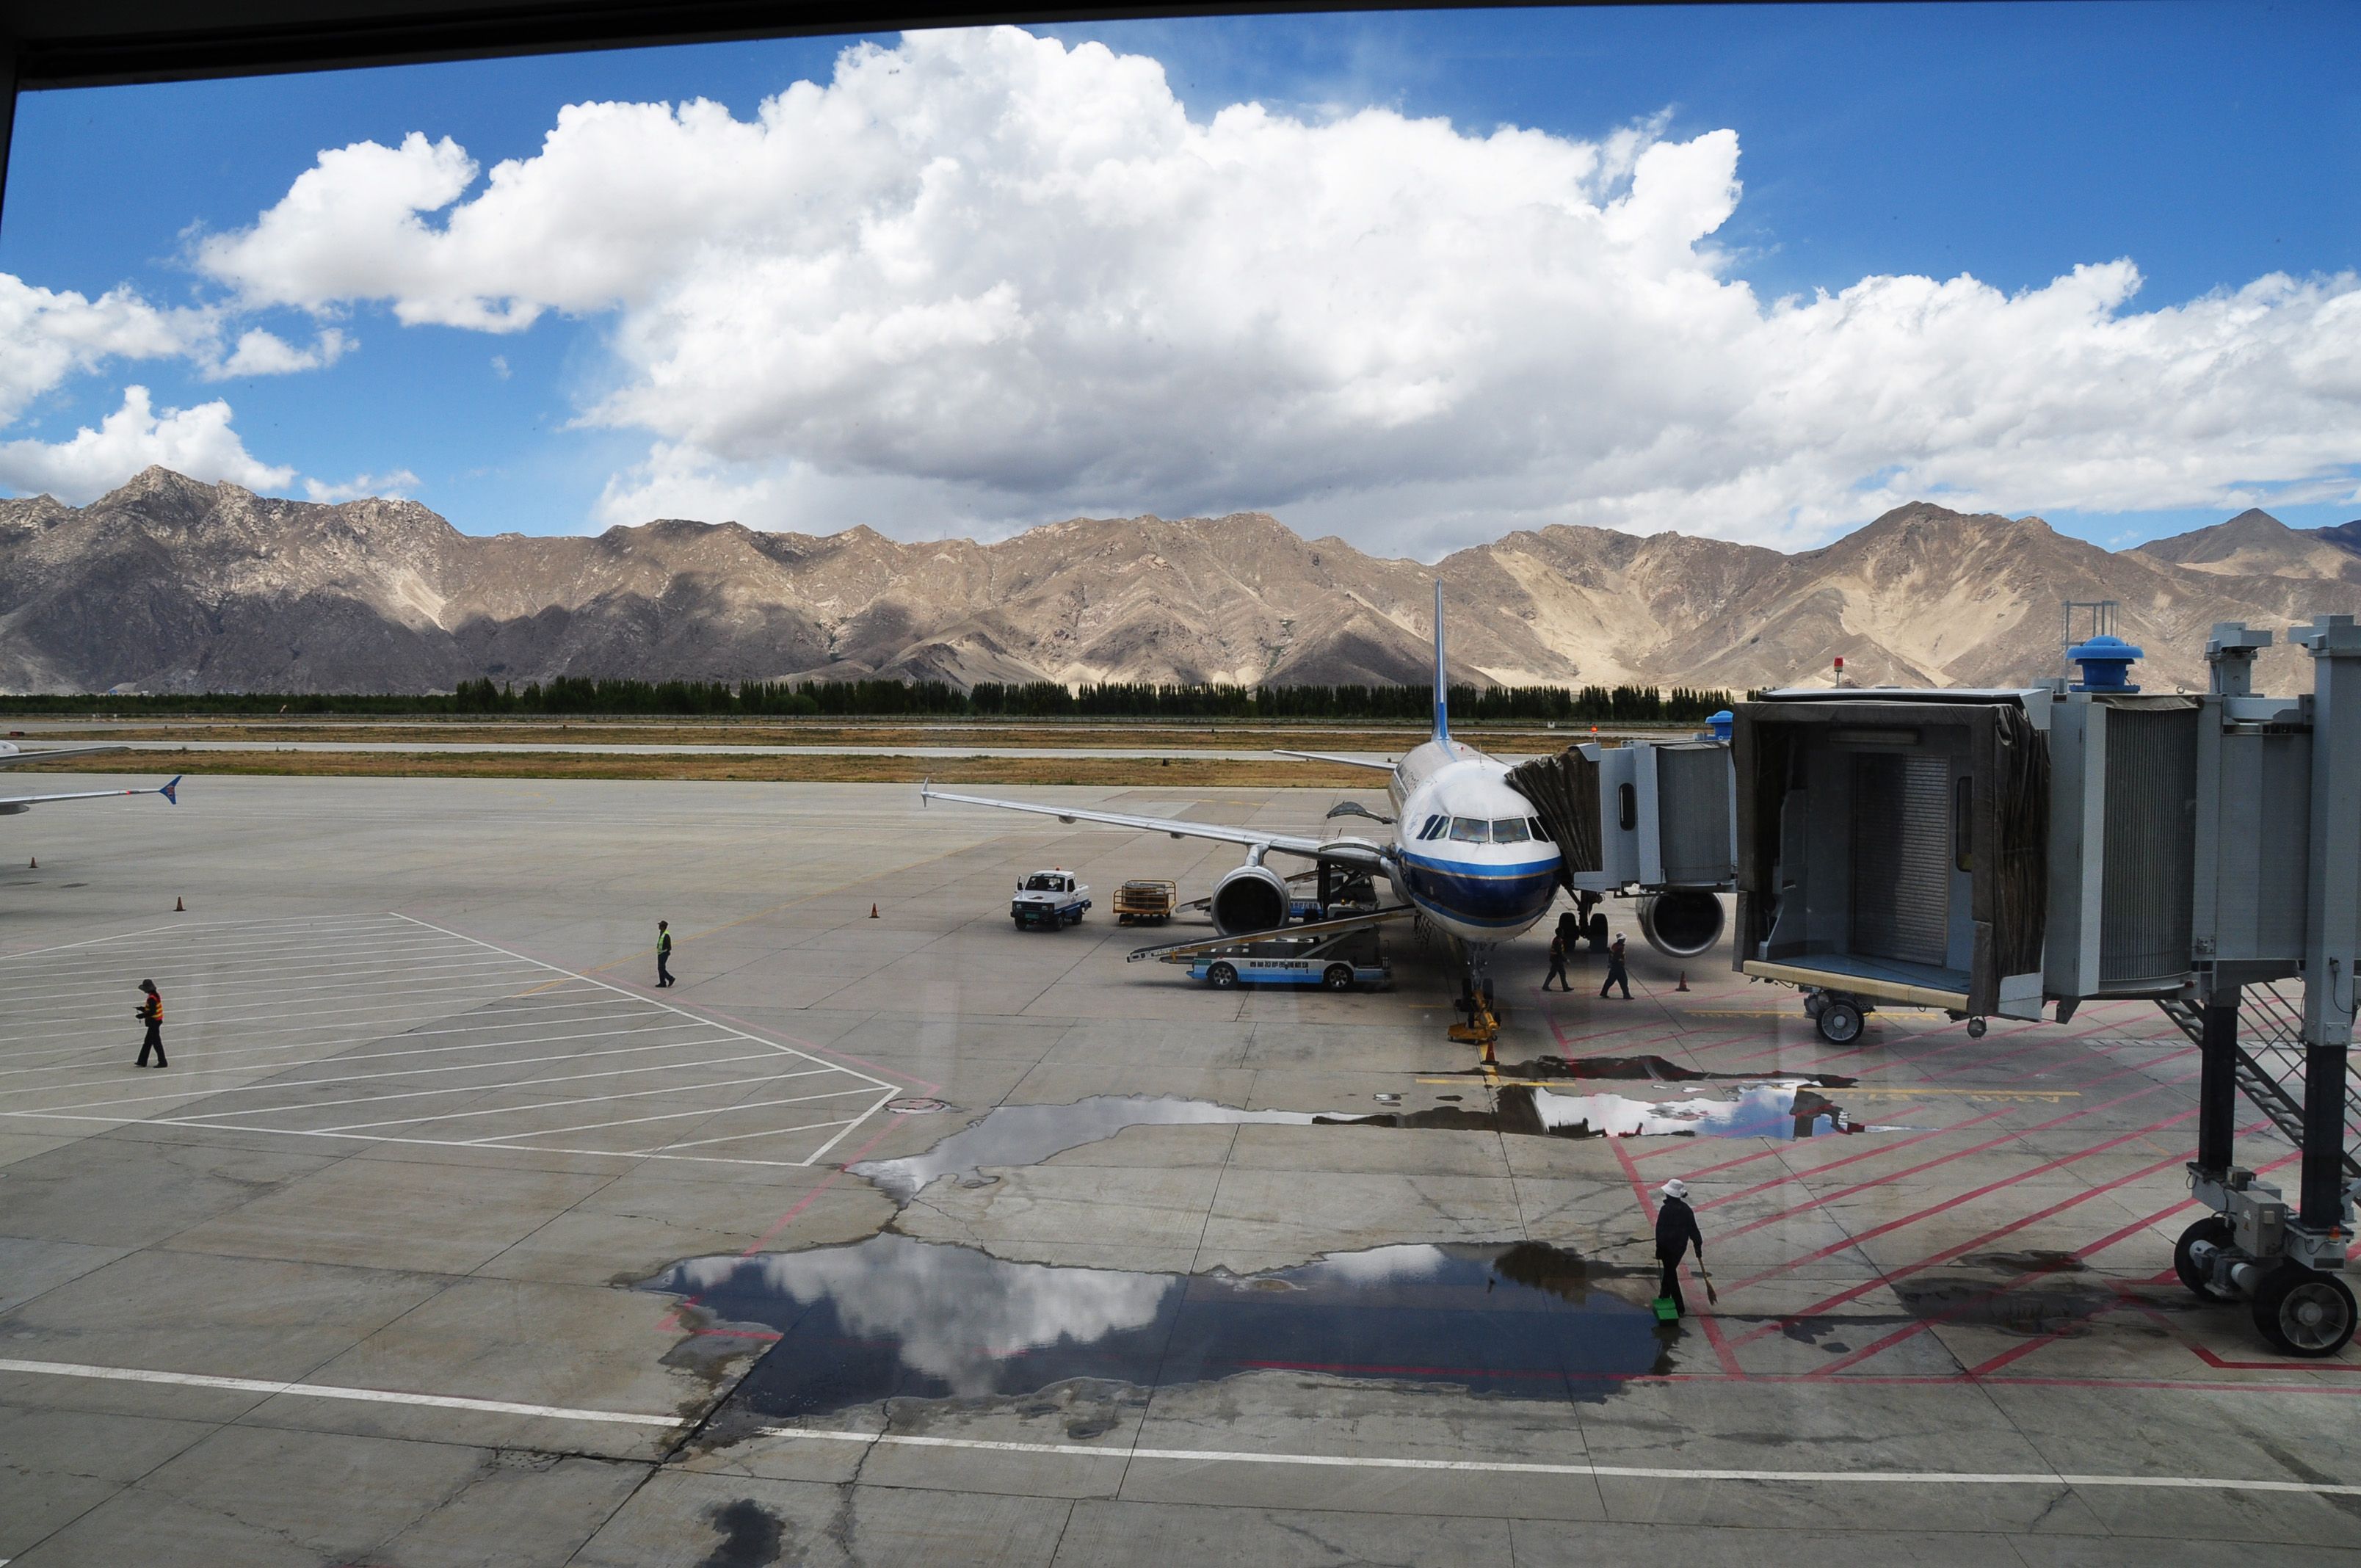 An aircraft parked at Lhasa airport, with mountains in the background.